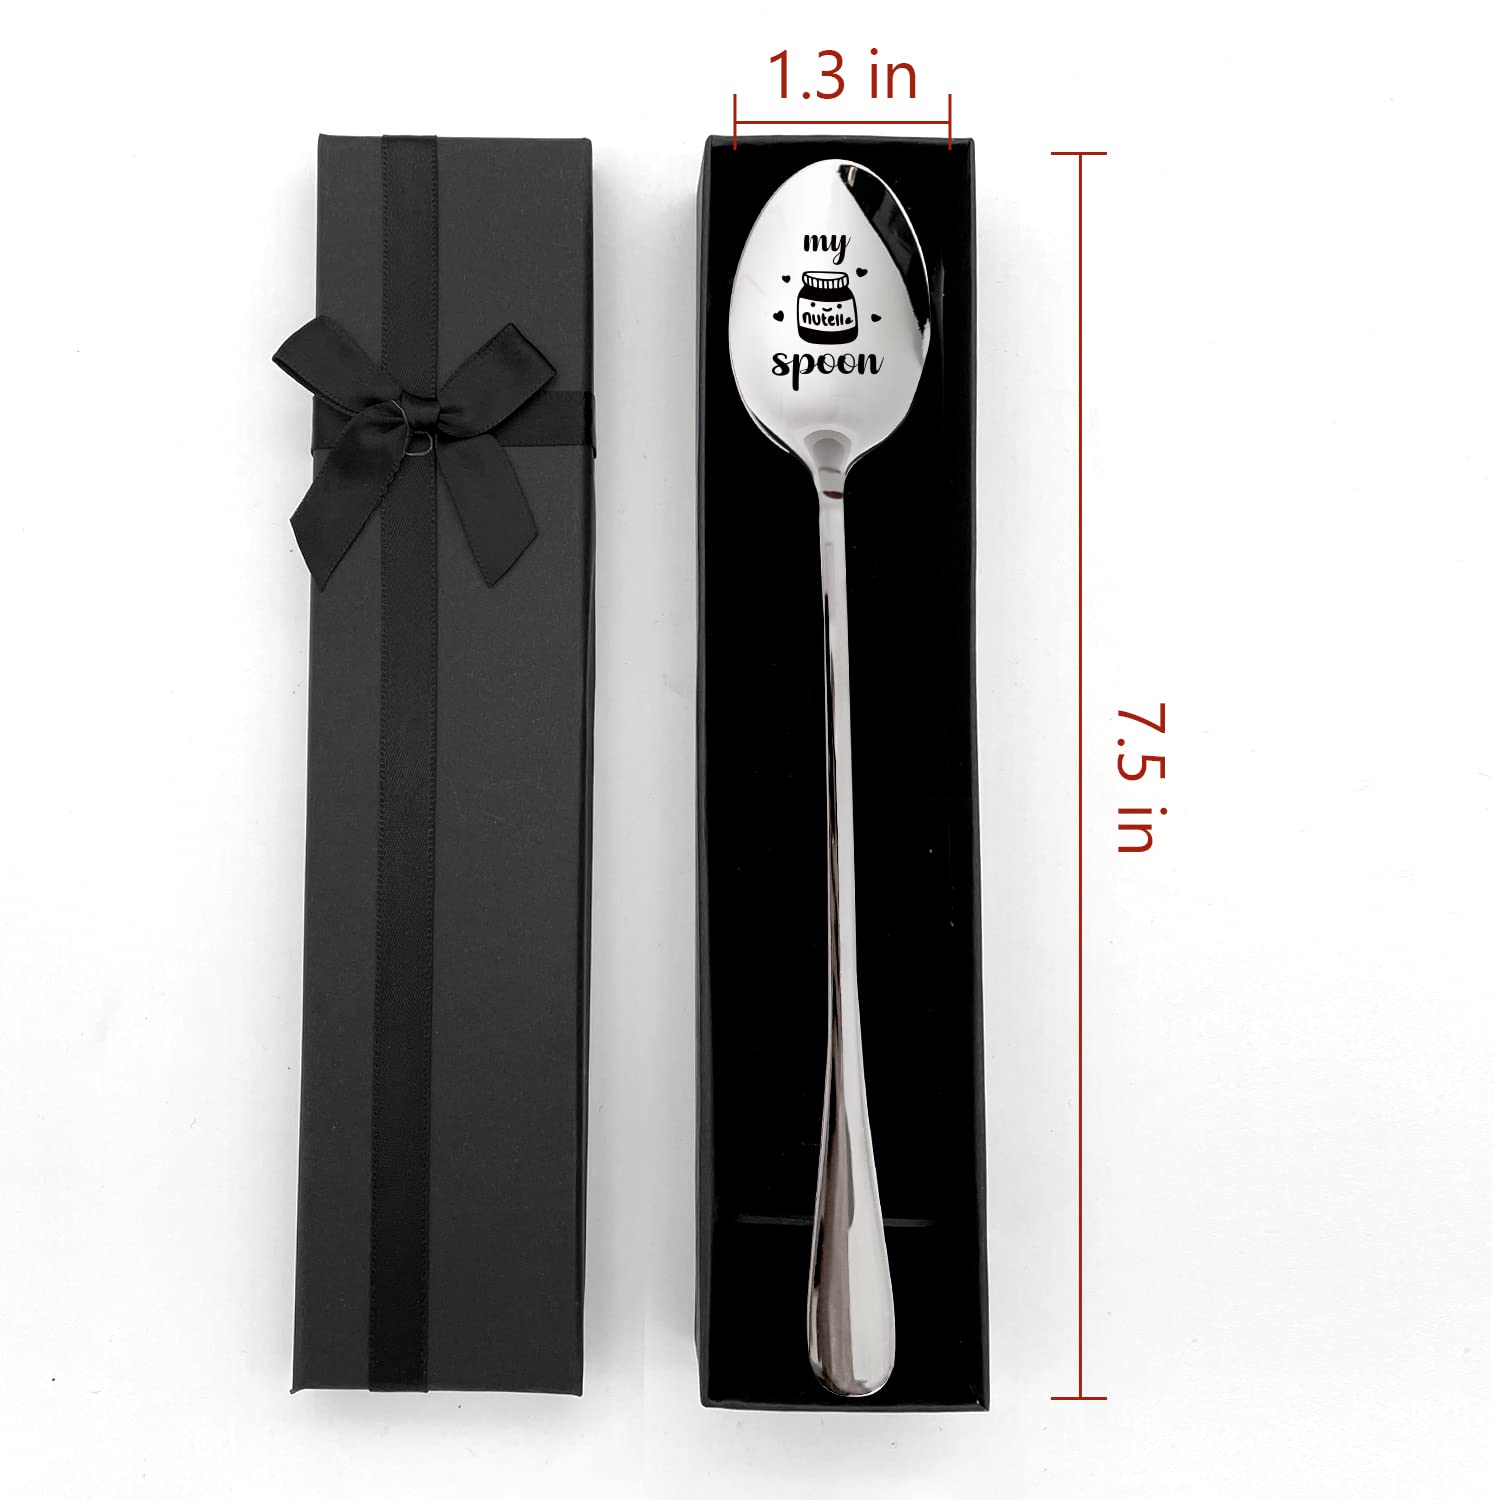 XIKAINUO My Nutella Spoon Stainless Steel Dessert Spoon for Nutella Lovers, Gift for Any Nutella Fan or a Perfect Addition to Your Own Collection of Spoons